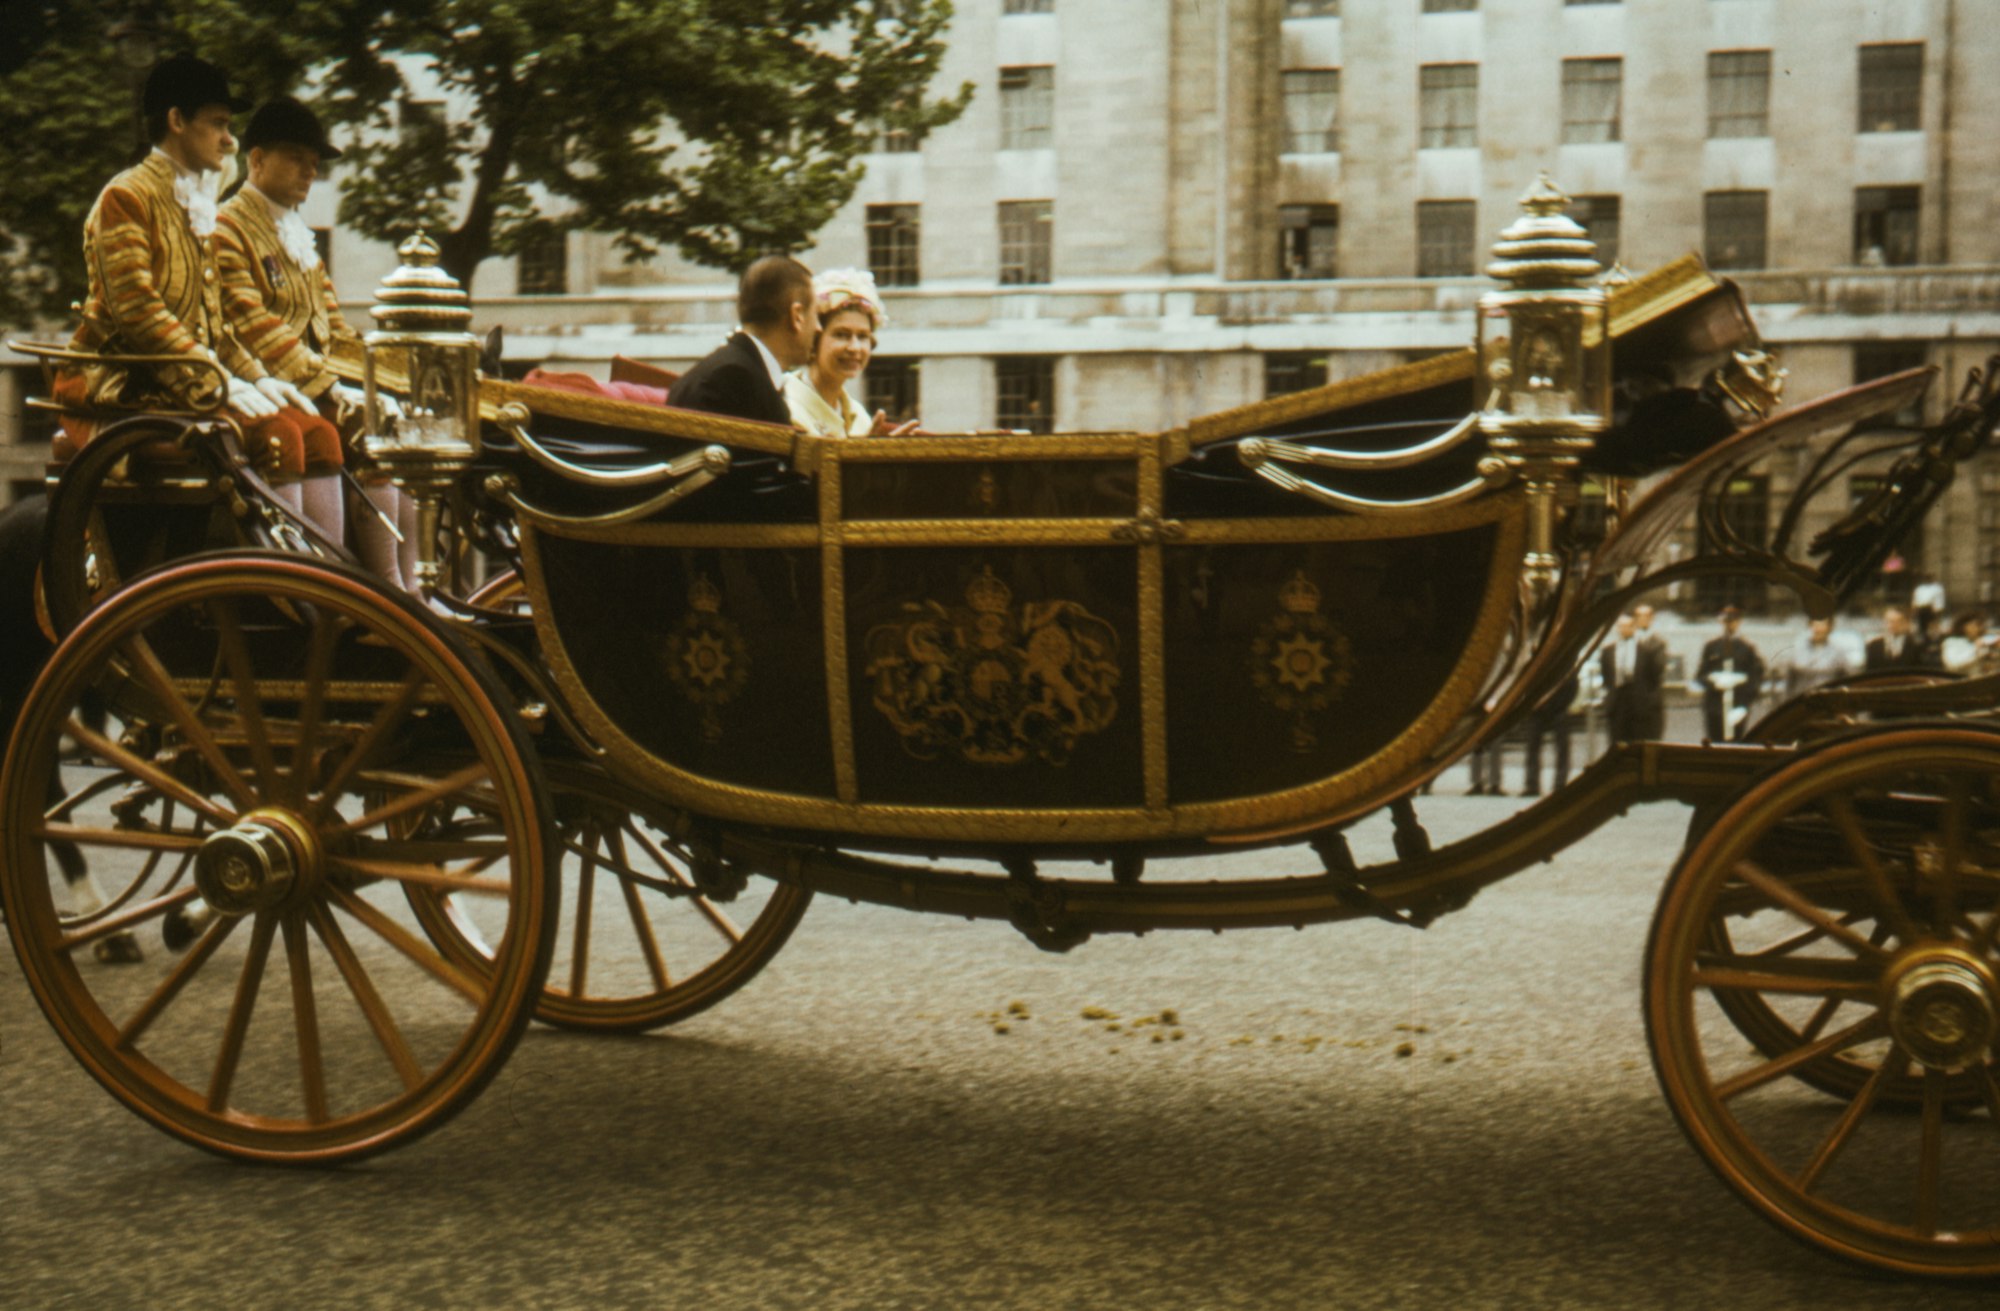 1965, Queen Elizabeth II sits in a carriage during the Opening of Parliament, Queens royal procession